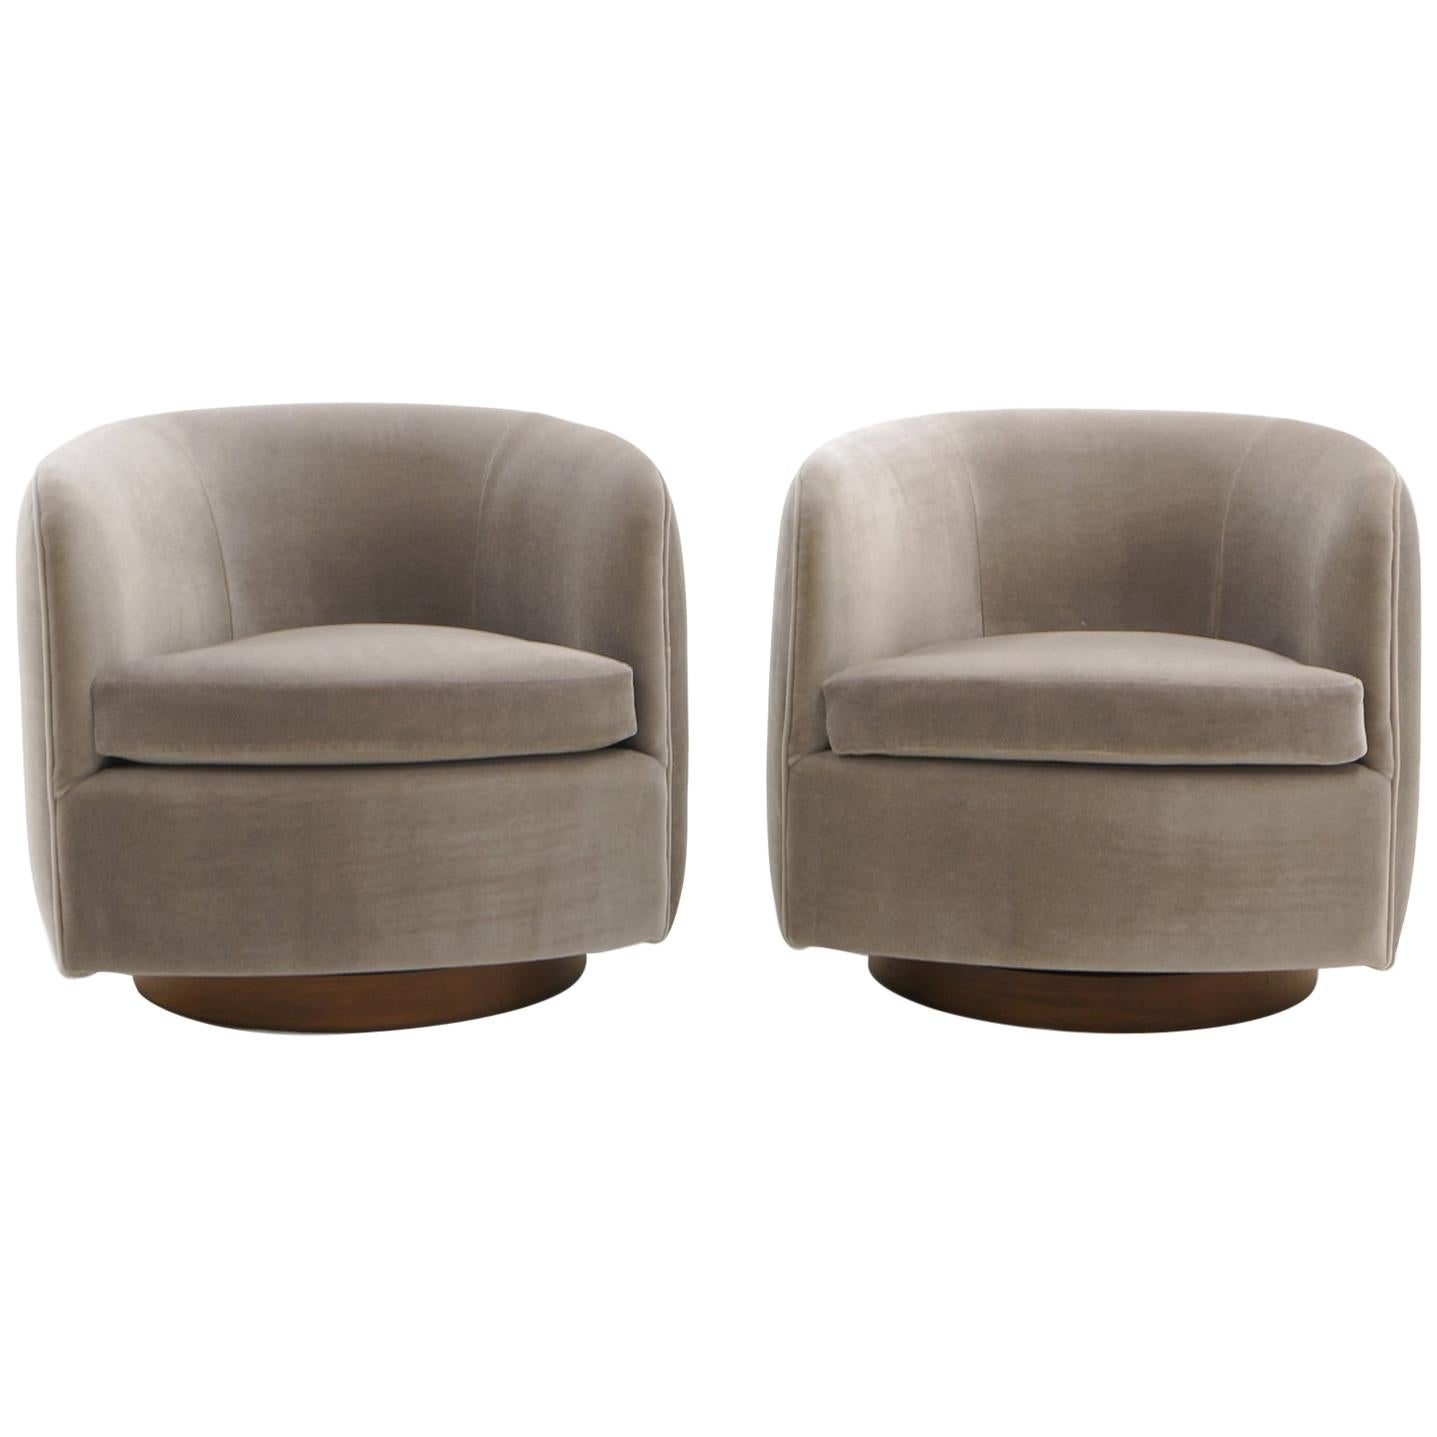 Pair of Tilt Swivel Club Lounge Chairs by Milo Baughman, Light Gray Real Mohair